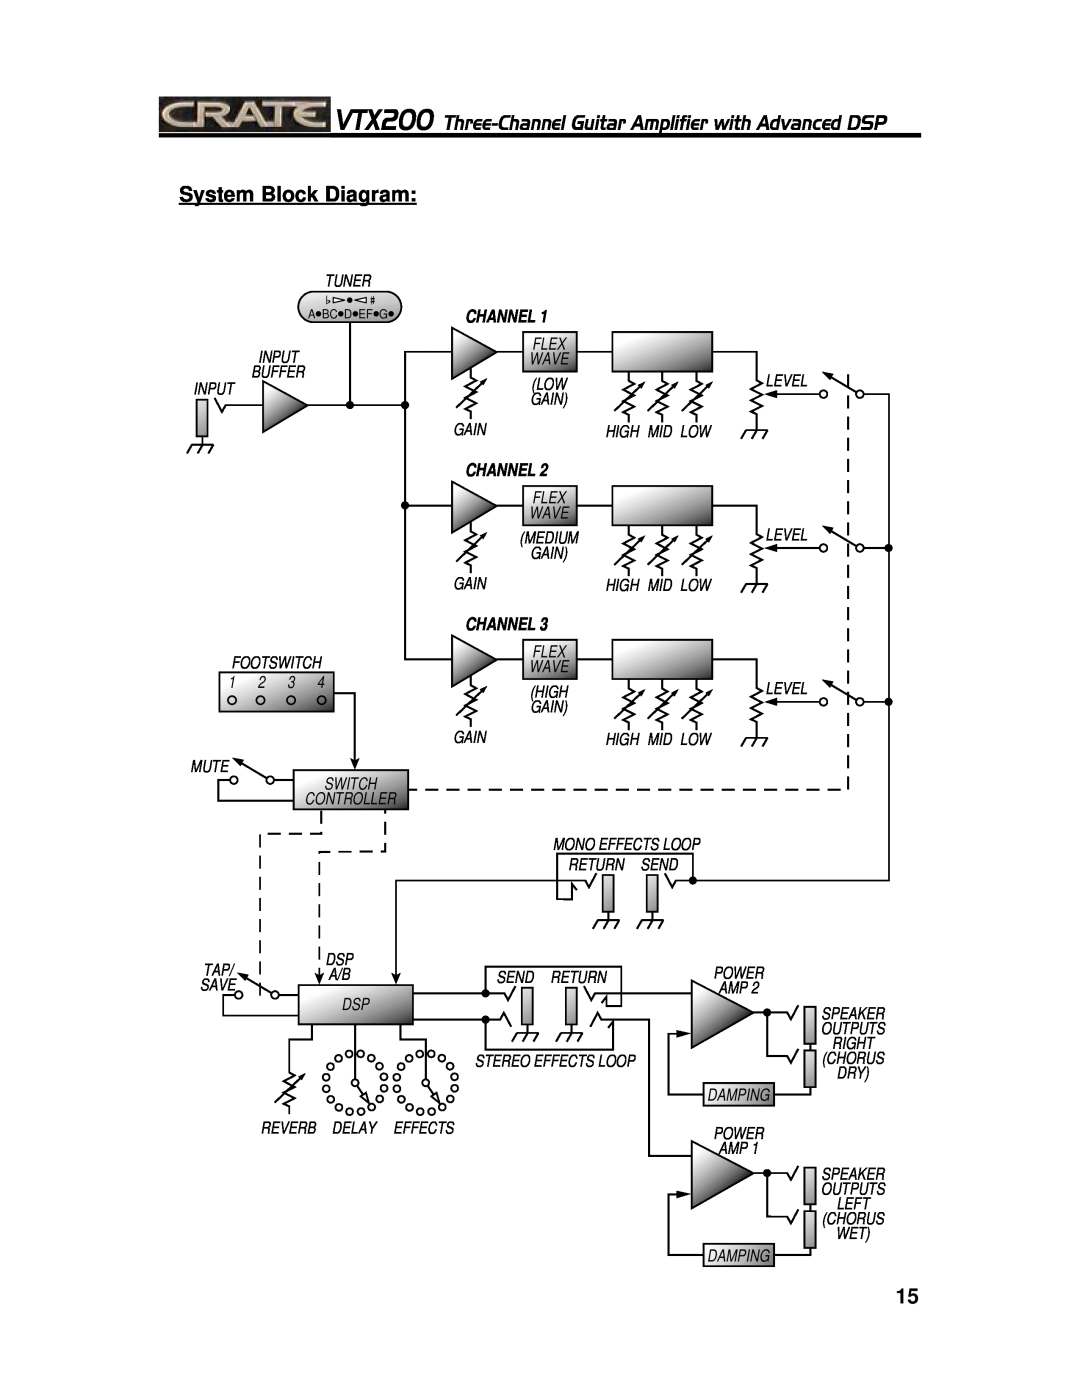 Crate Amplifiers VTX200 manual System Block Diagram, Channel 